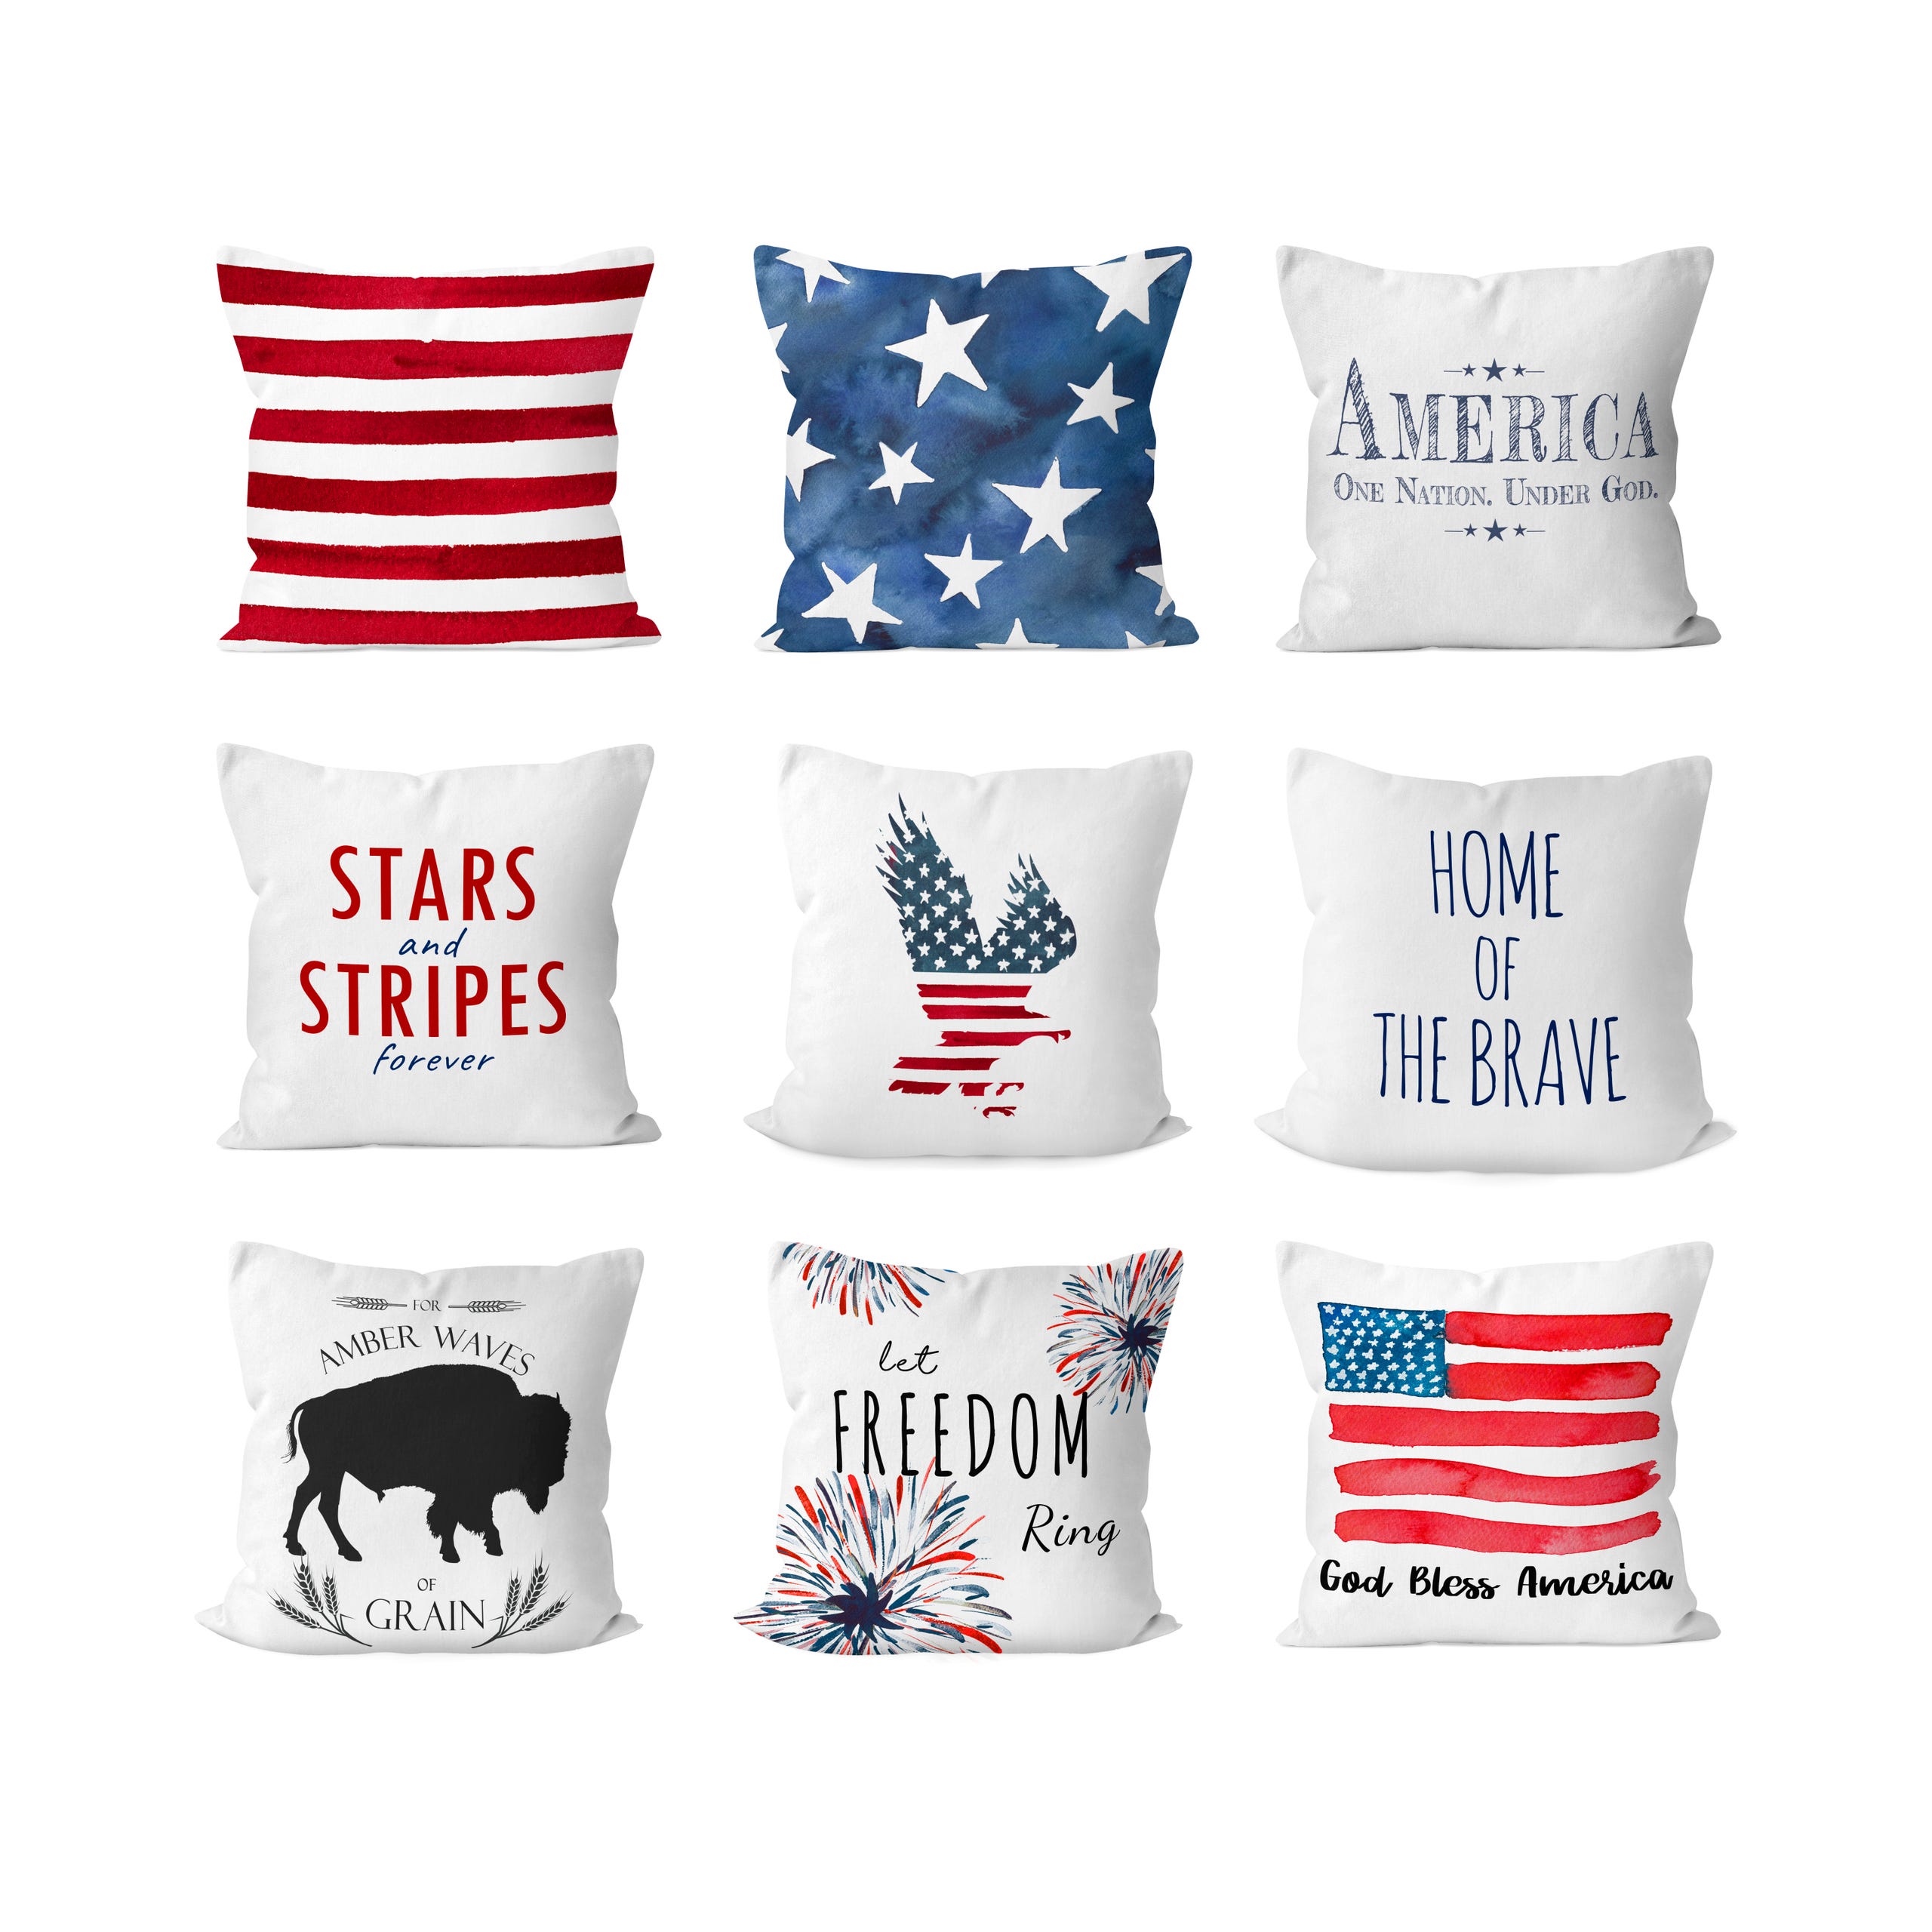 Nine decorative pillows with patriotic American themes, including stripes, stars, and phrases related to America.